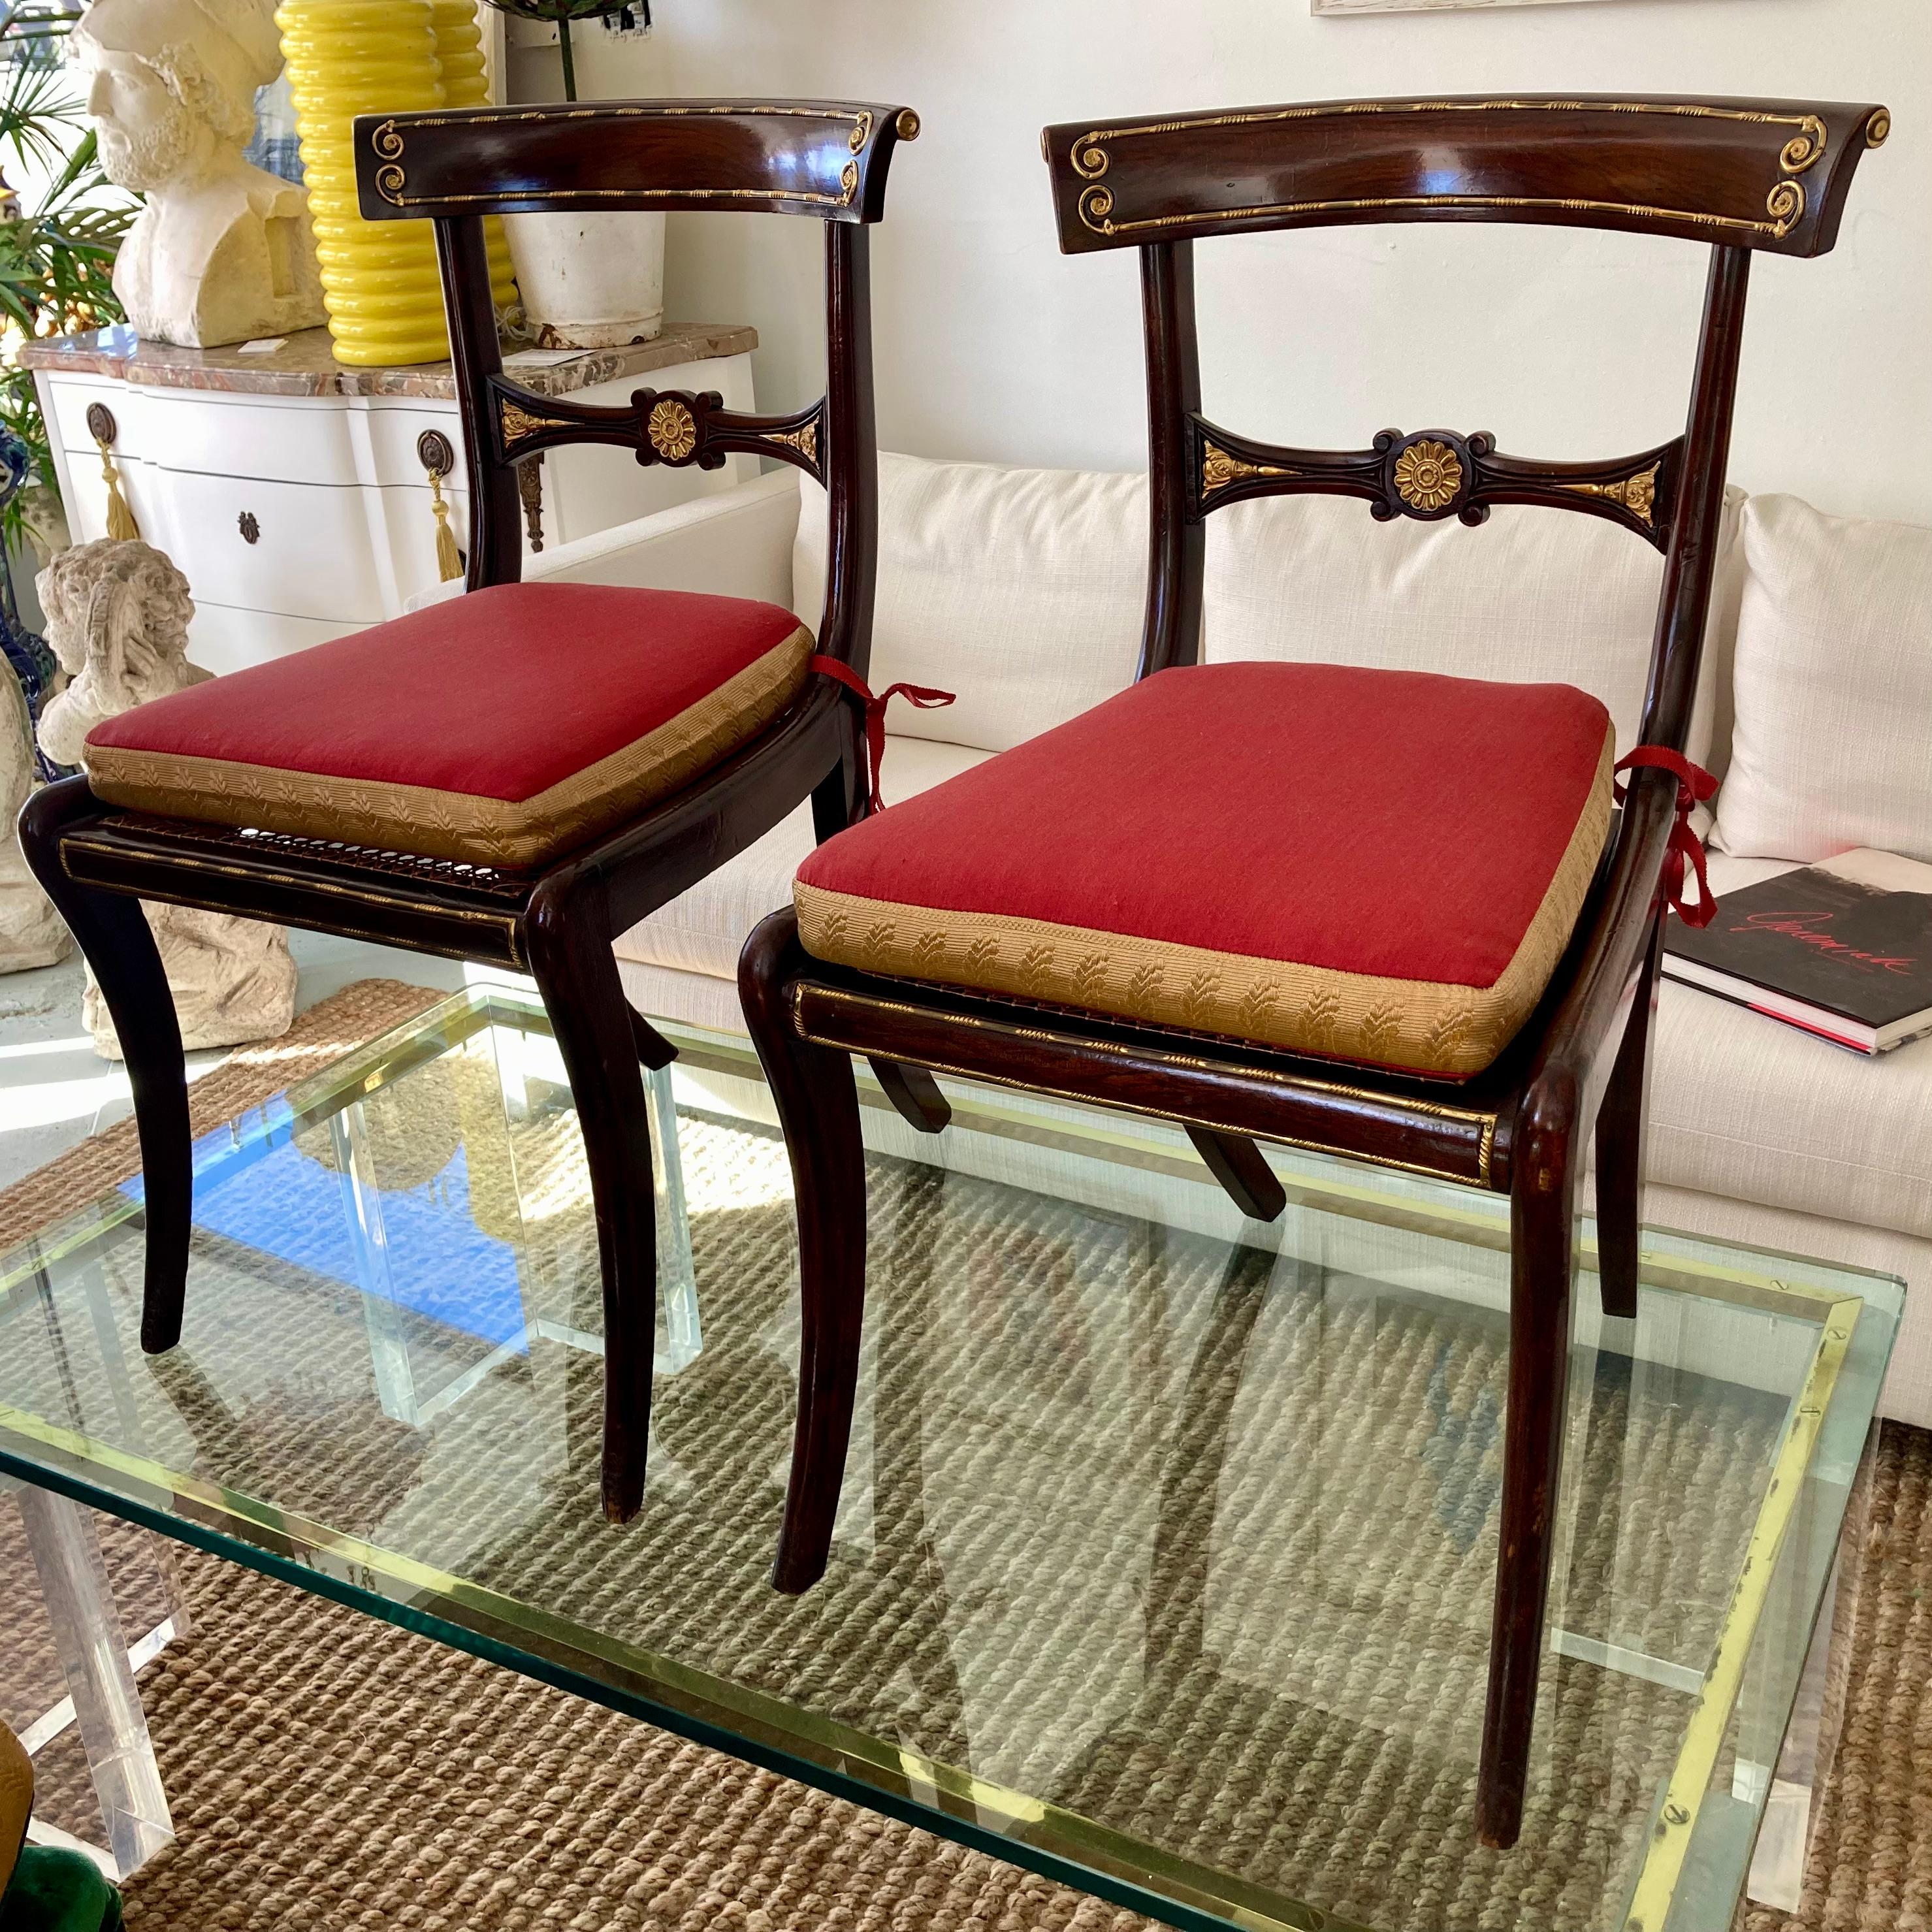 19th C Ormolu Inset Regency Chairs With Red Cushions and Gold Metal, Set of 8 For Sale 2